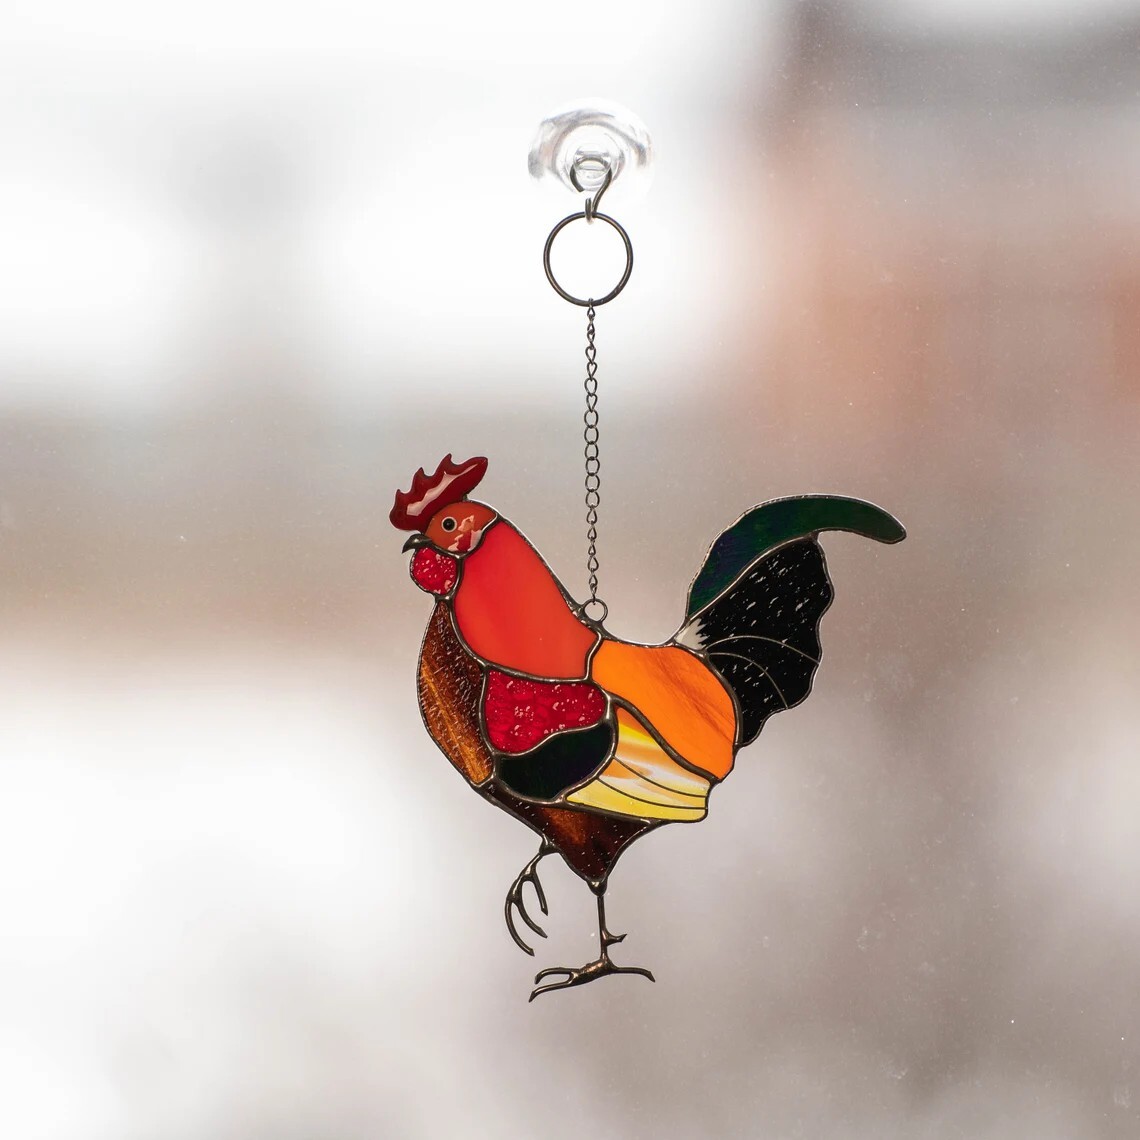 Rooster stained glass window hangings